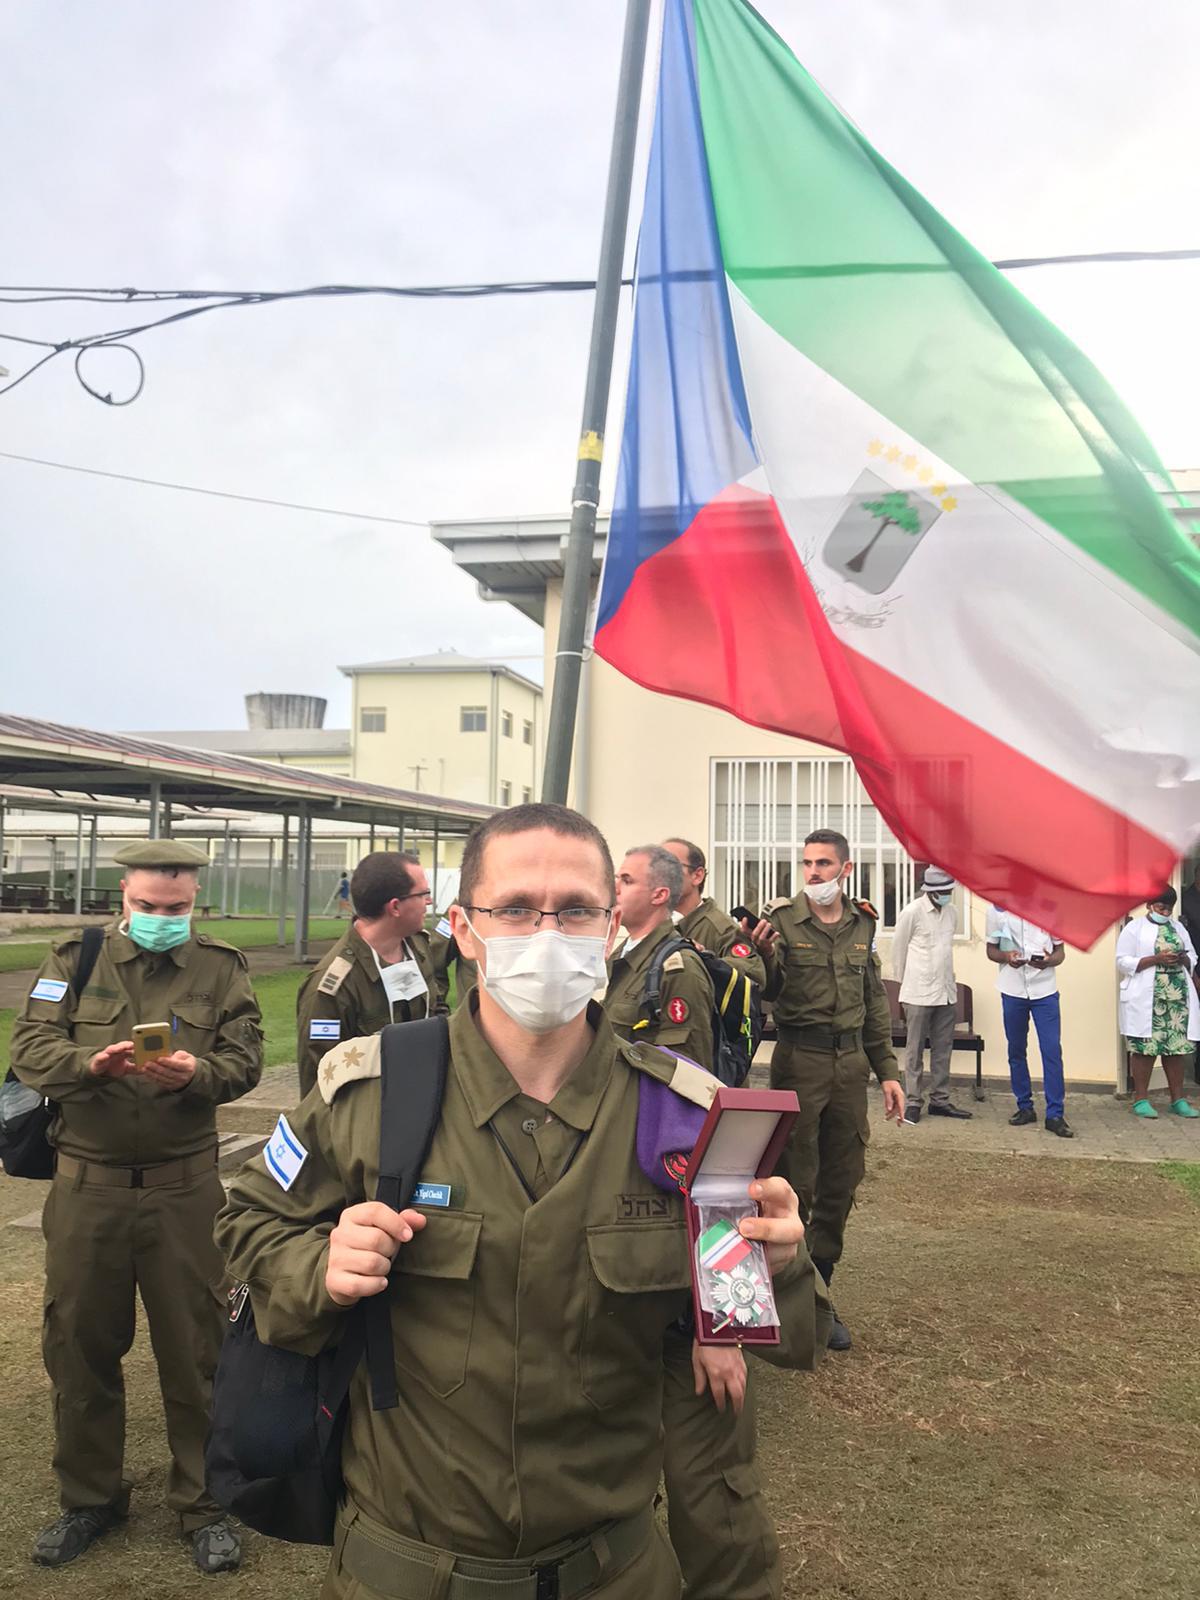 IDF Lt. Col. Dr. Yigal Chechik, a member of the emergency delegation to Equatorial Guinea in March 2021. Photo courtesy of the IDF Spokesperson’s Unit